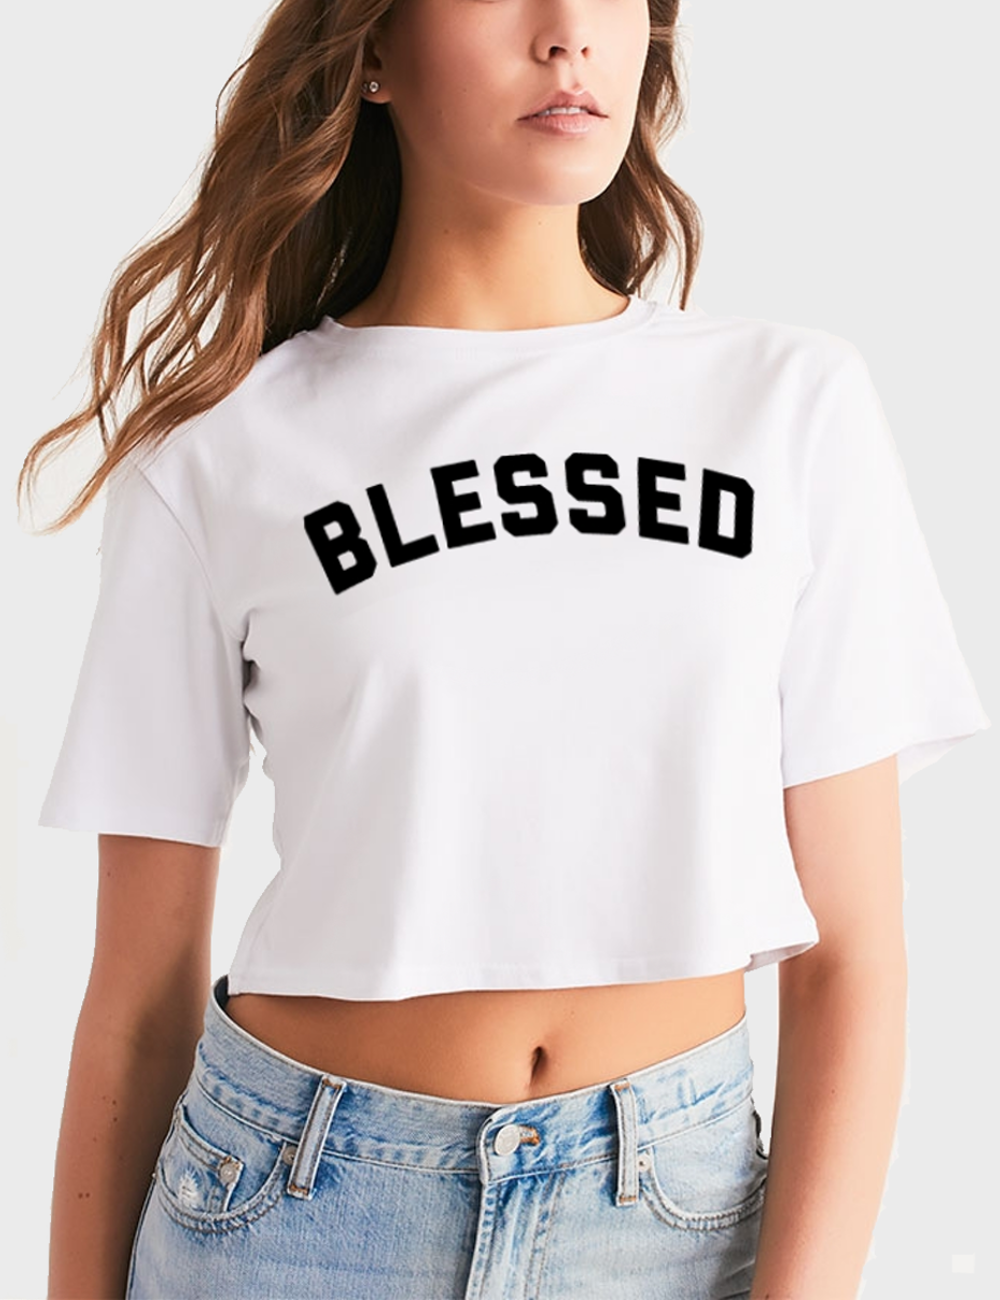 Blessed | Women's Relaxed Crop Top T-Shirt OniTakai